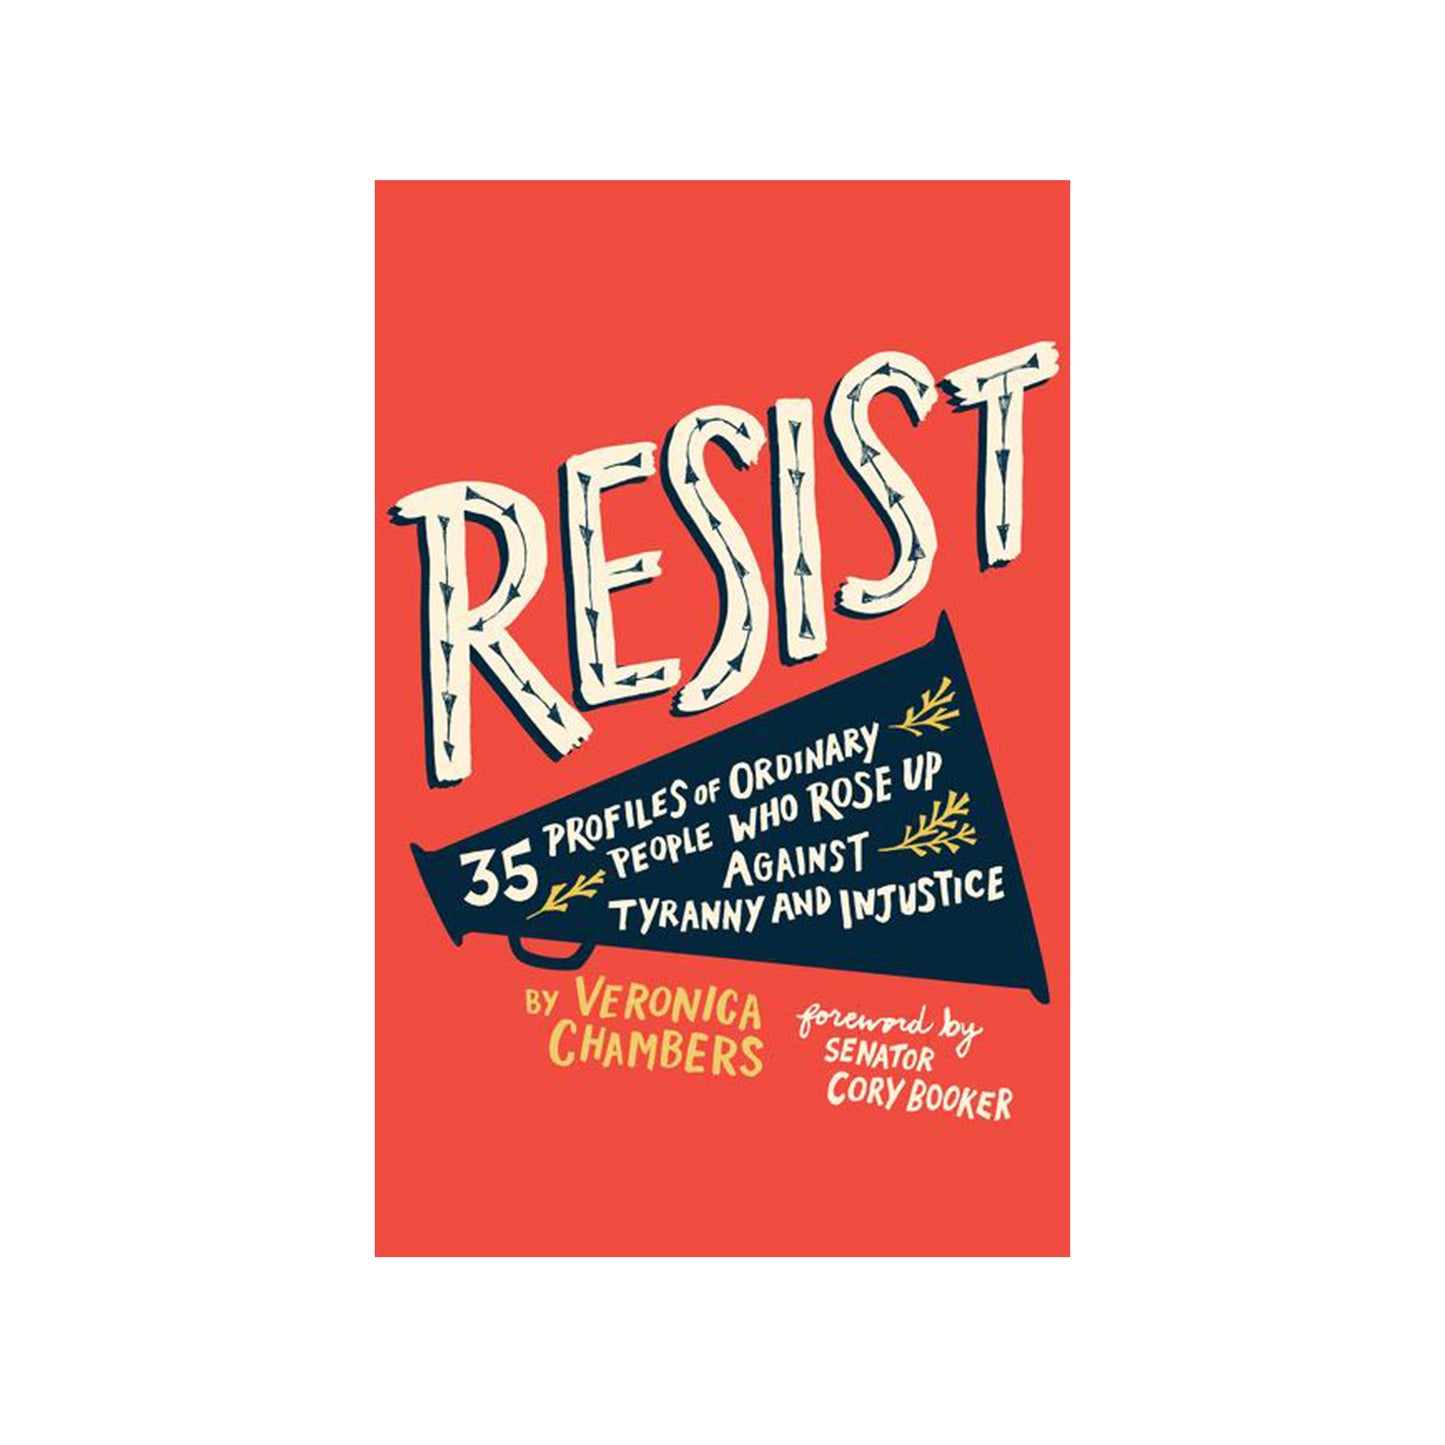 "Resist" by Veronica Chambers